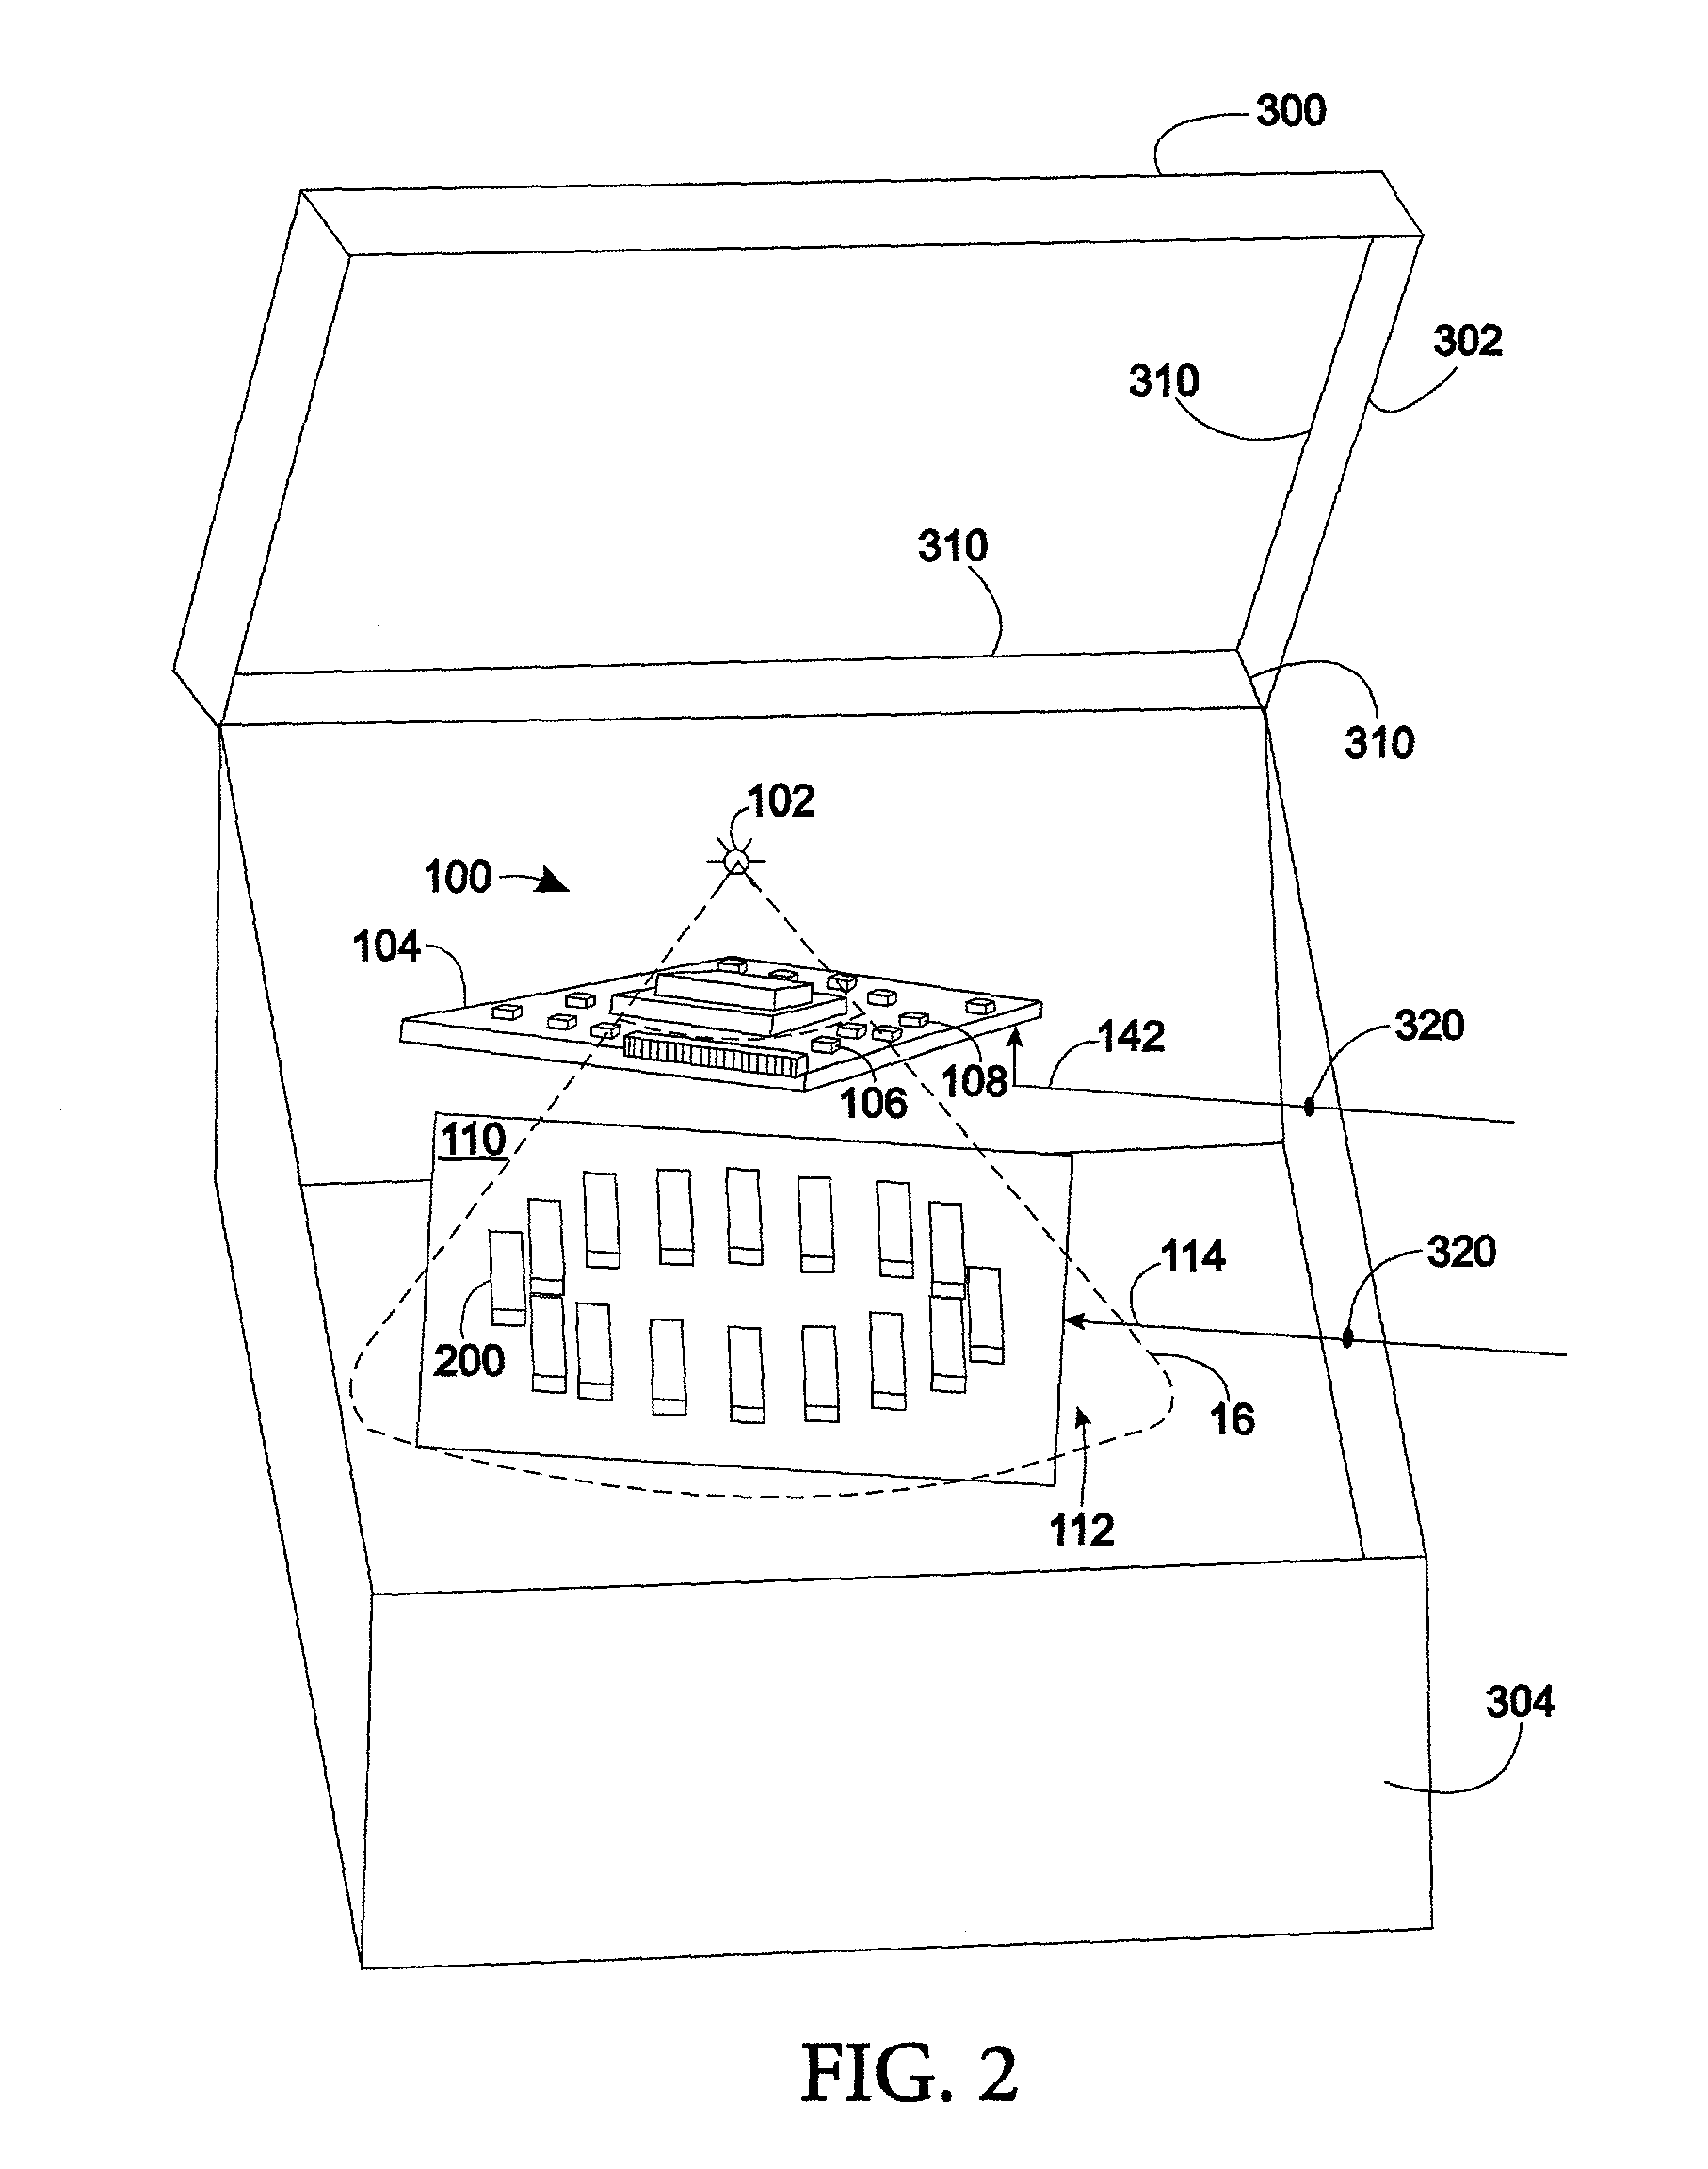 Condensed tungsten composite material and method for manufacturing and sealing a radiation shielding enclosure